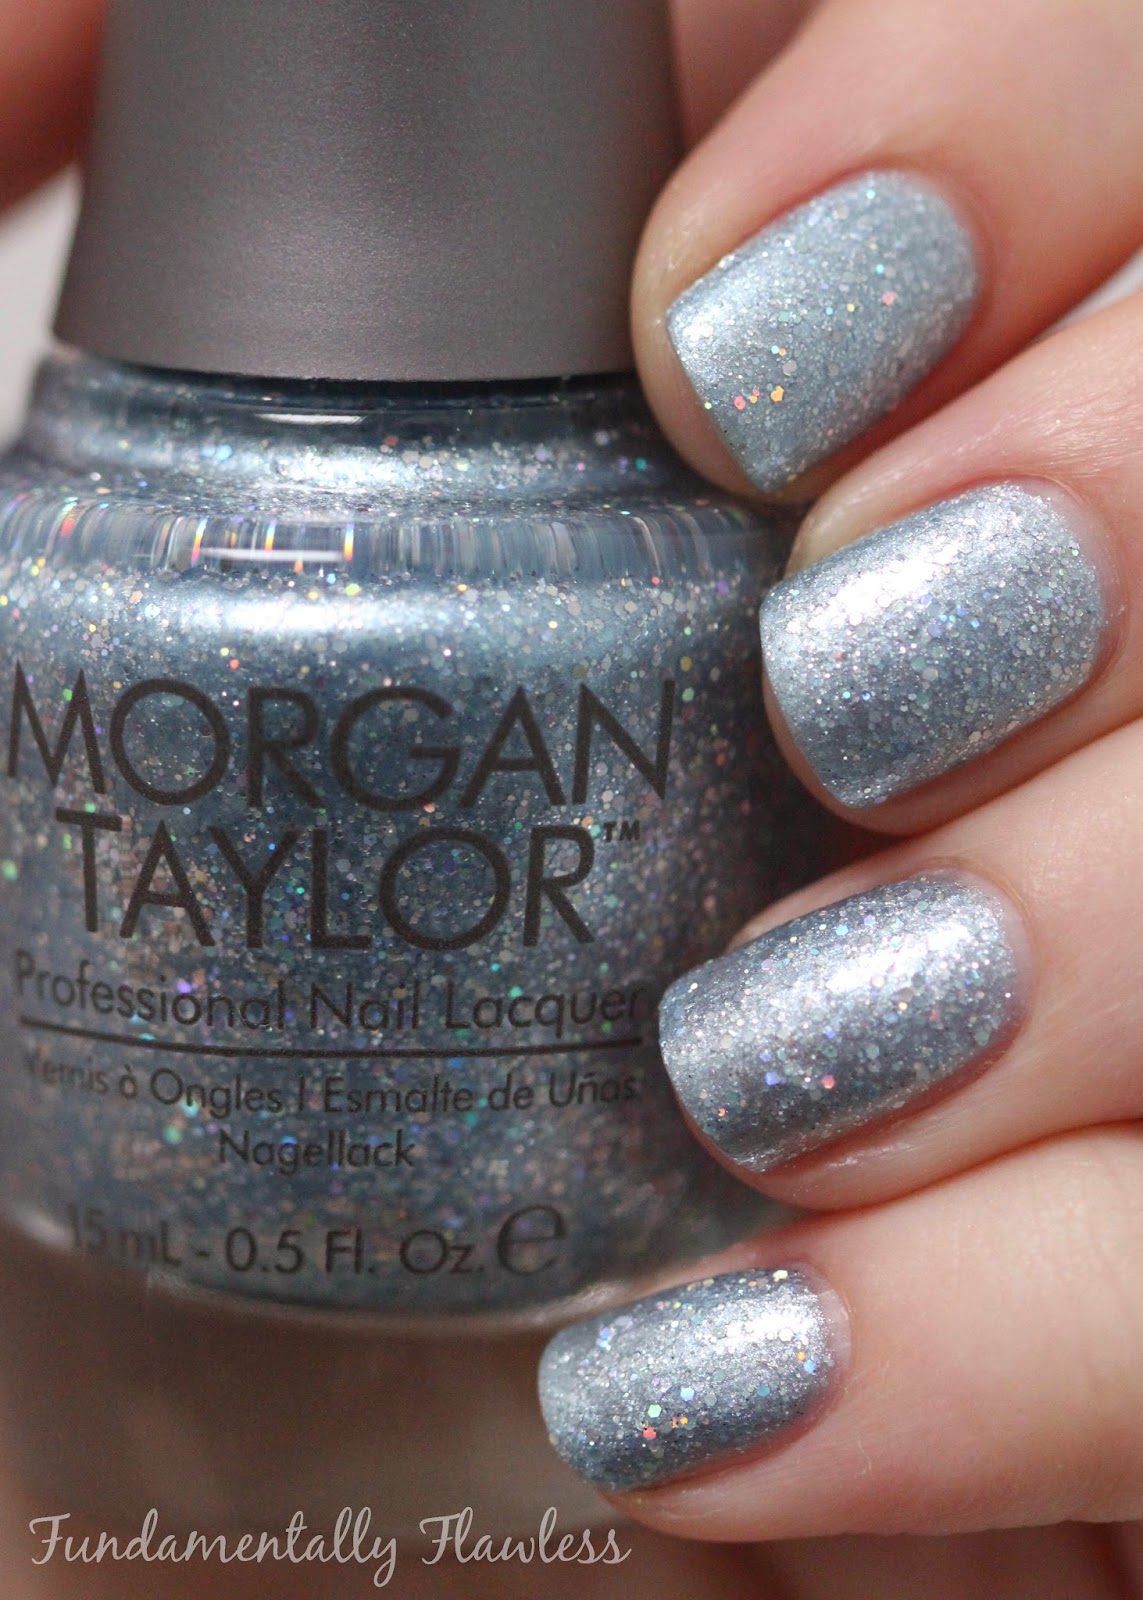 Morgan Taylor Cinderella Collection If The Slipper Fits swatch